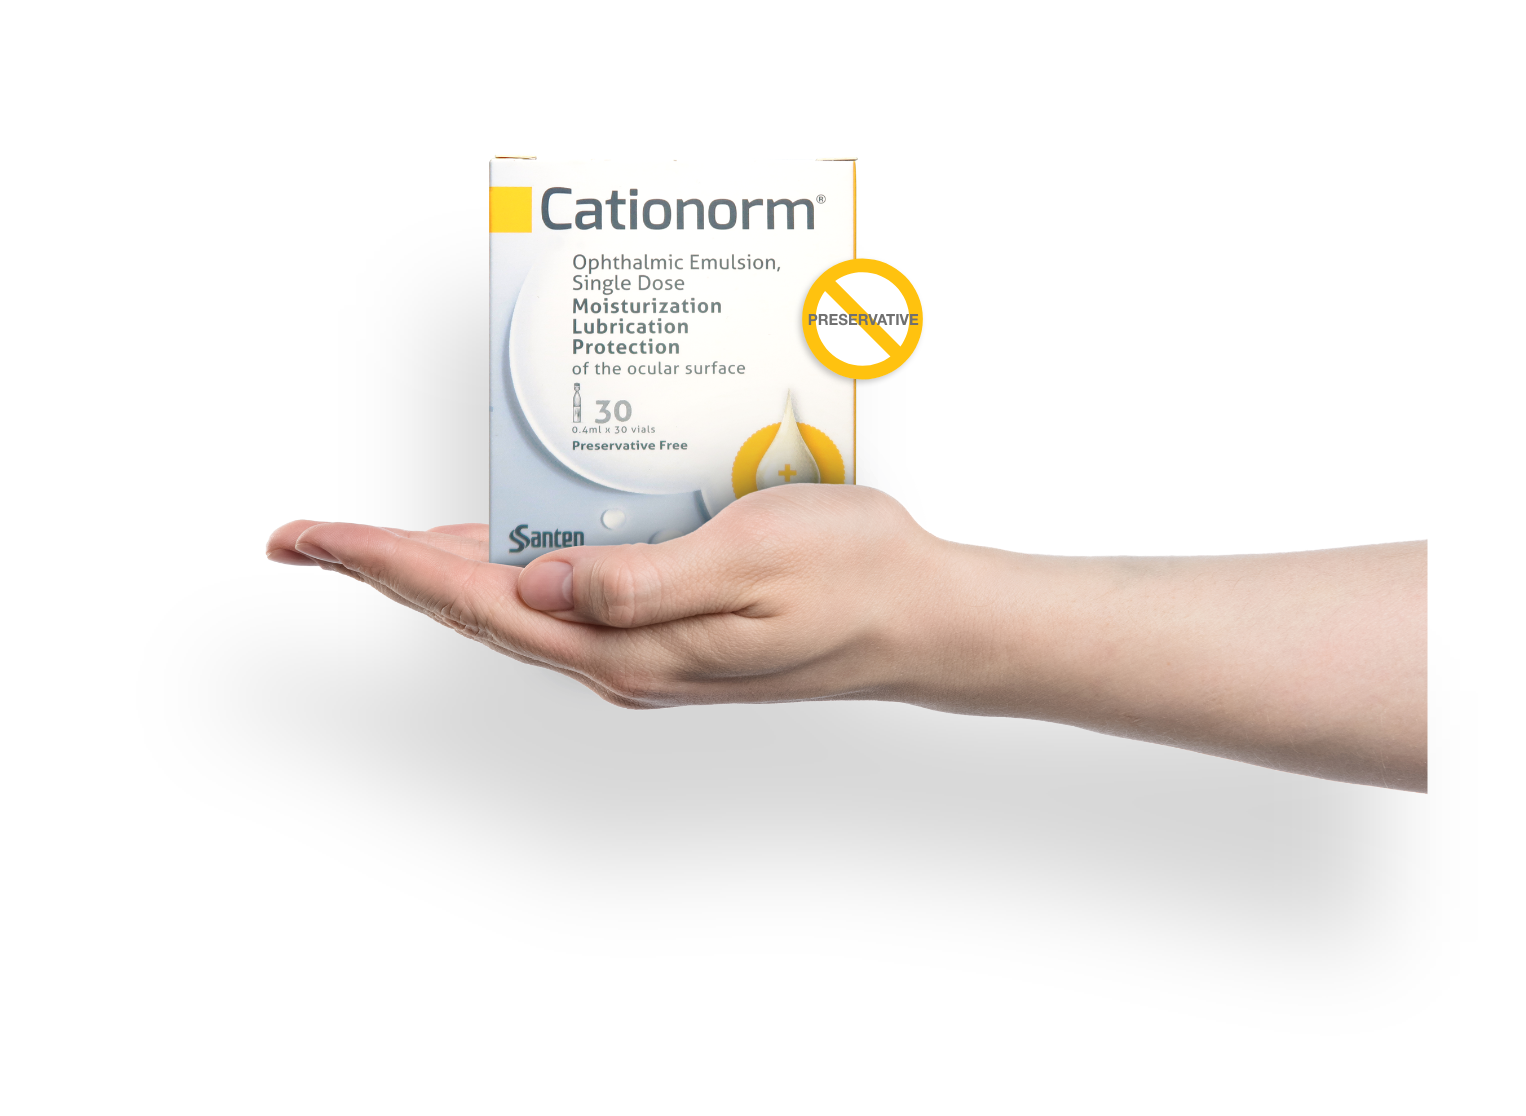 cationorm product on hand